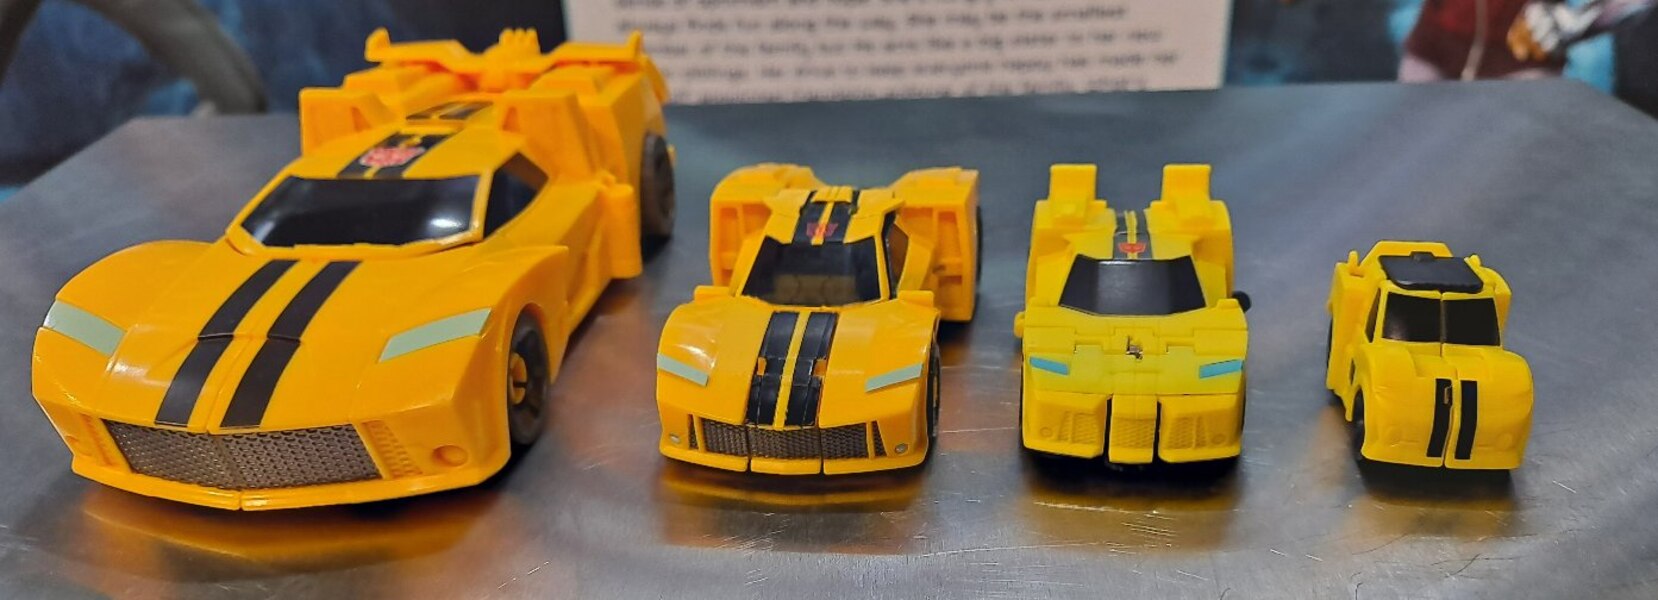 Image Of Transformers Earthspark Bumblebee Toy Comparison  (6 of 8)